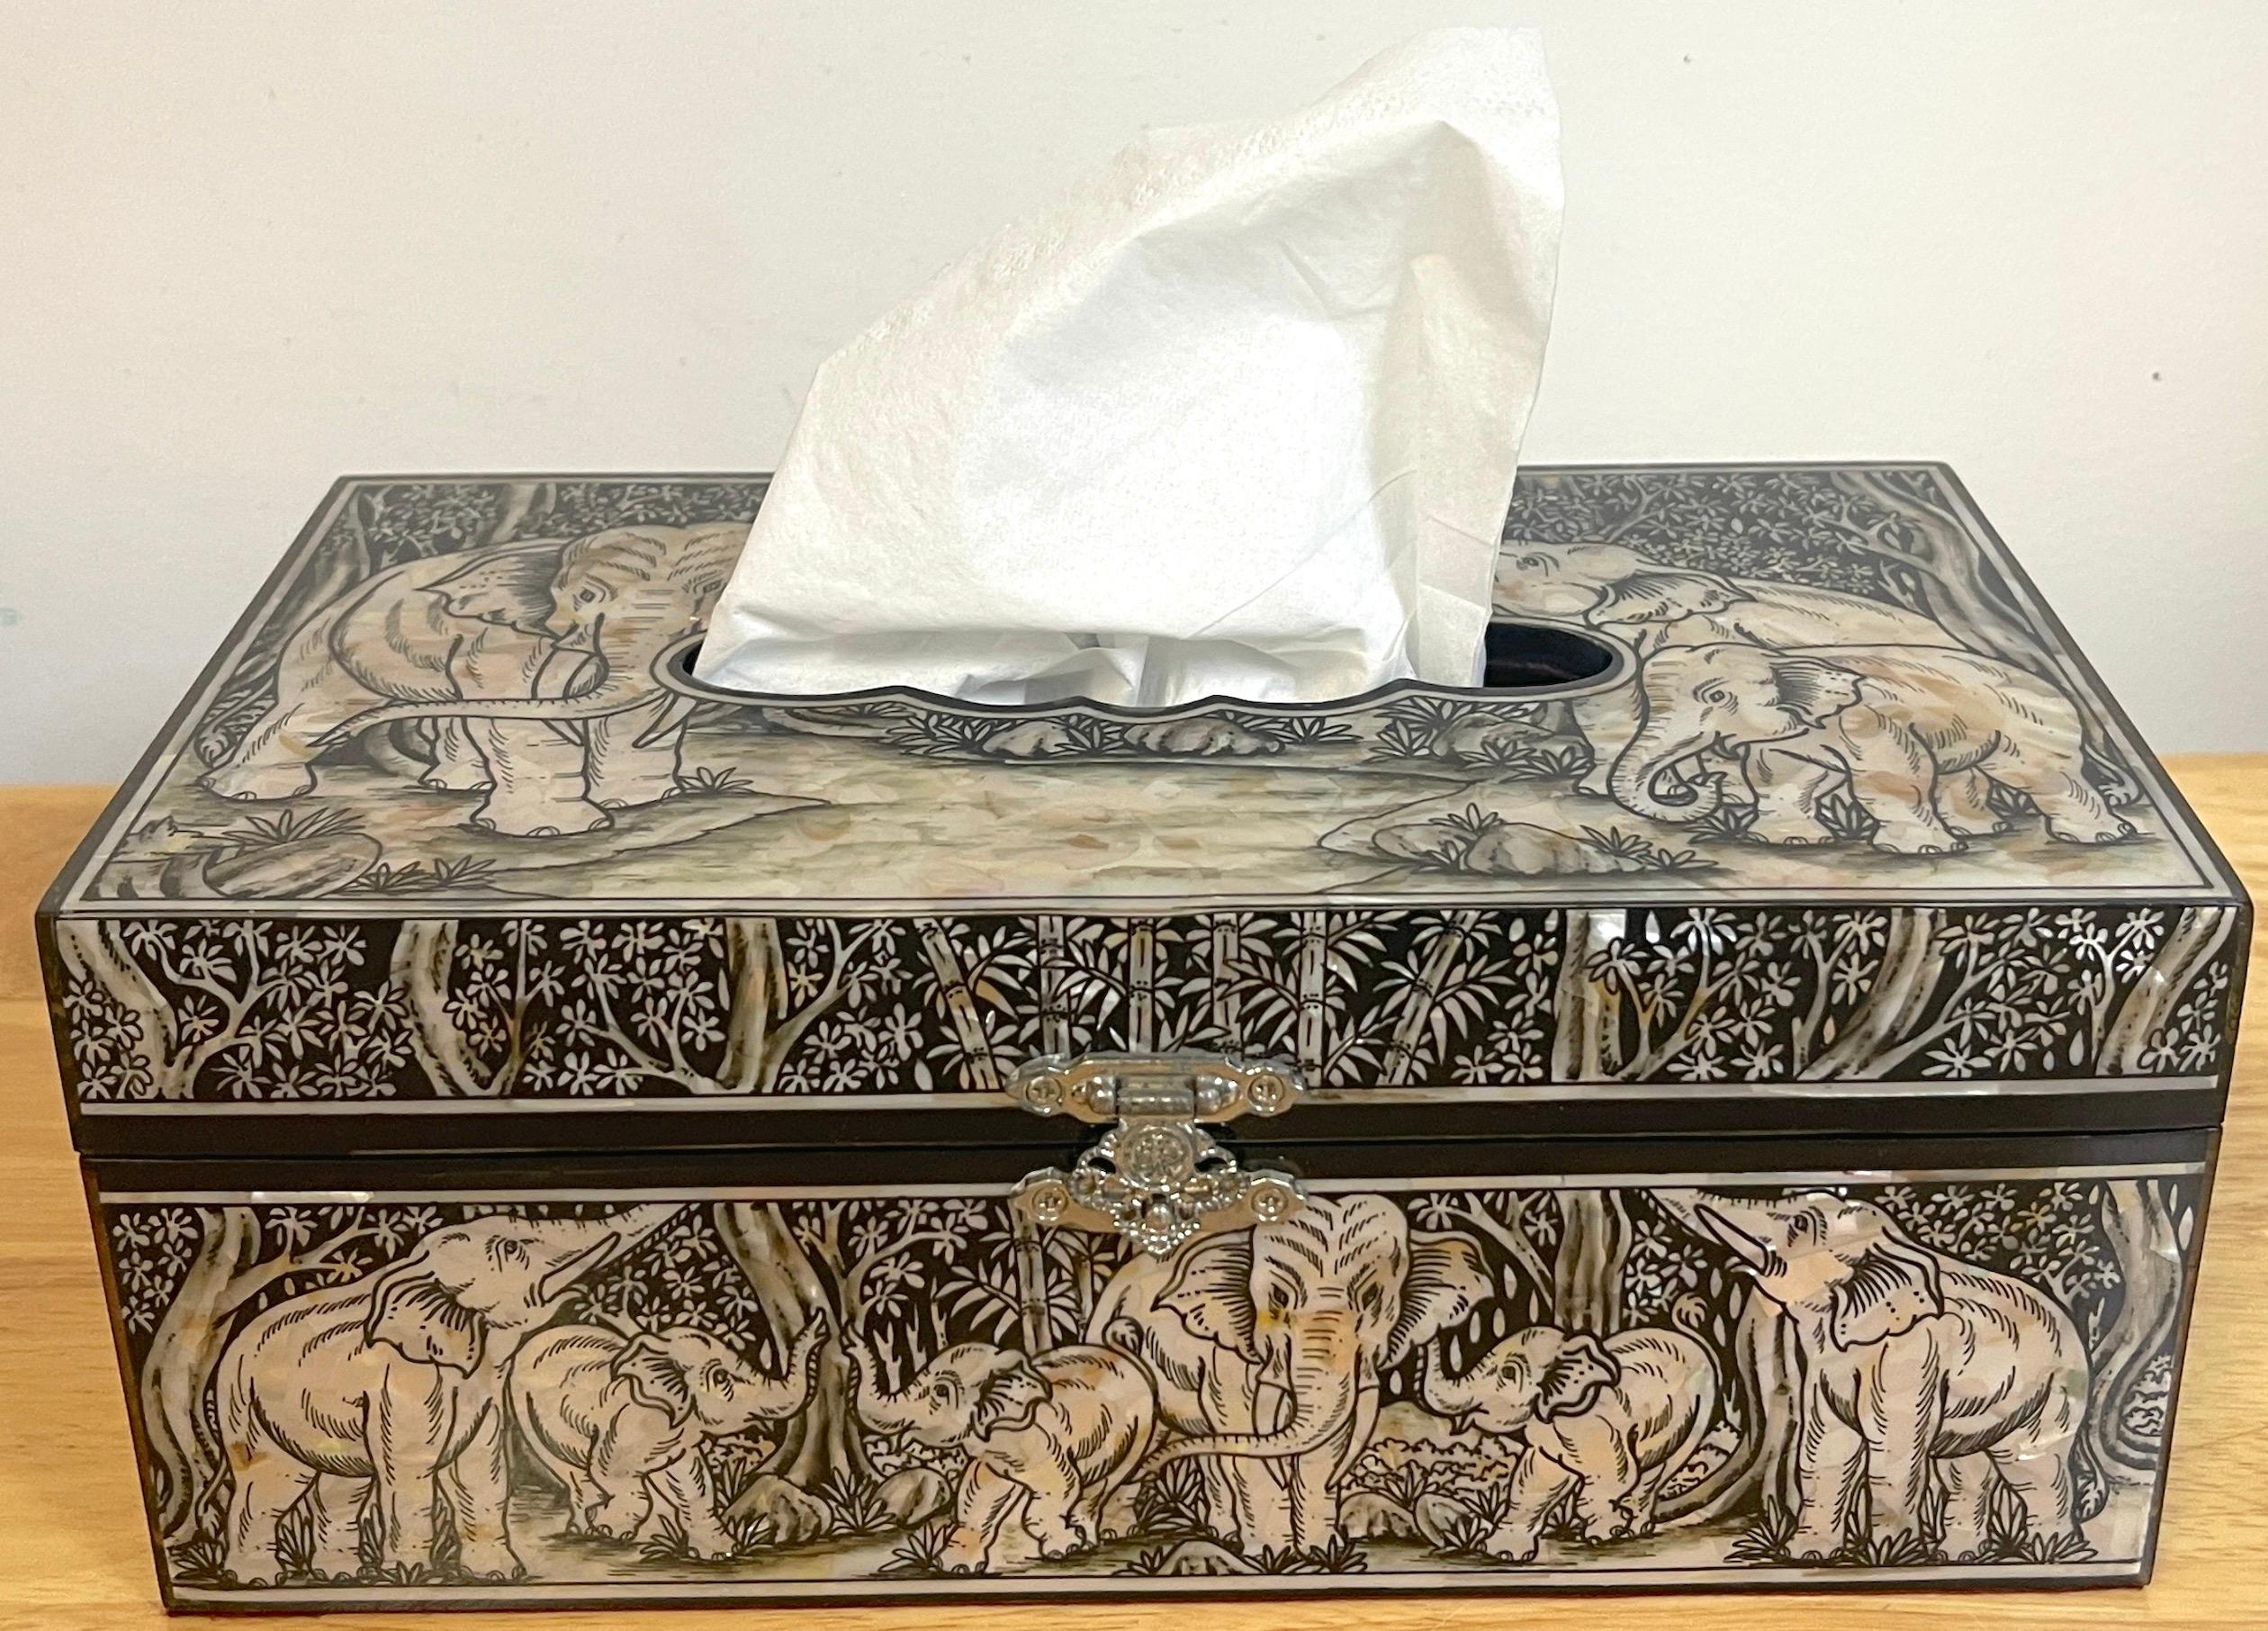 Exquisite Mother of Pearl Inlaid Lacquer Elephant Motif Tissue Box For Sale 1